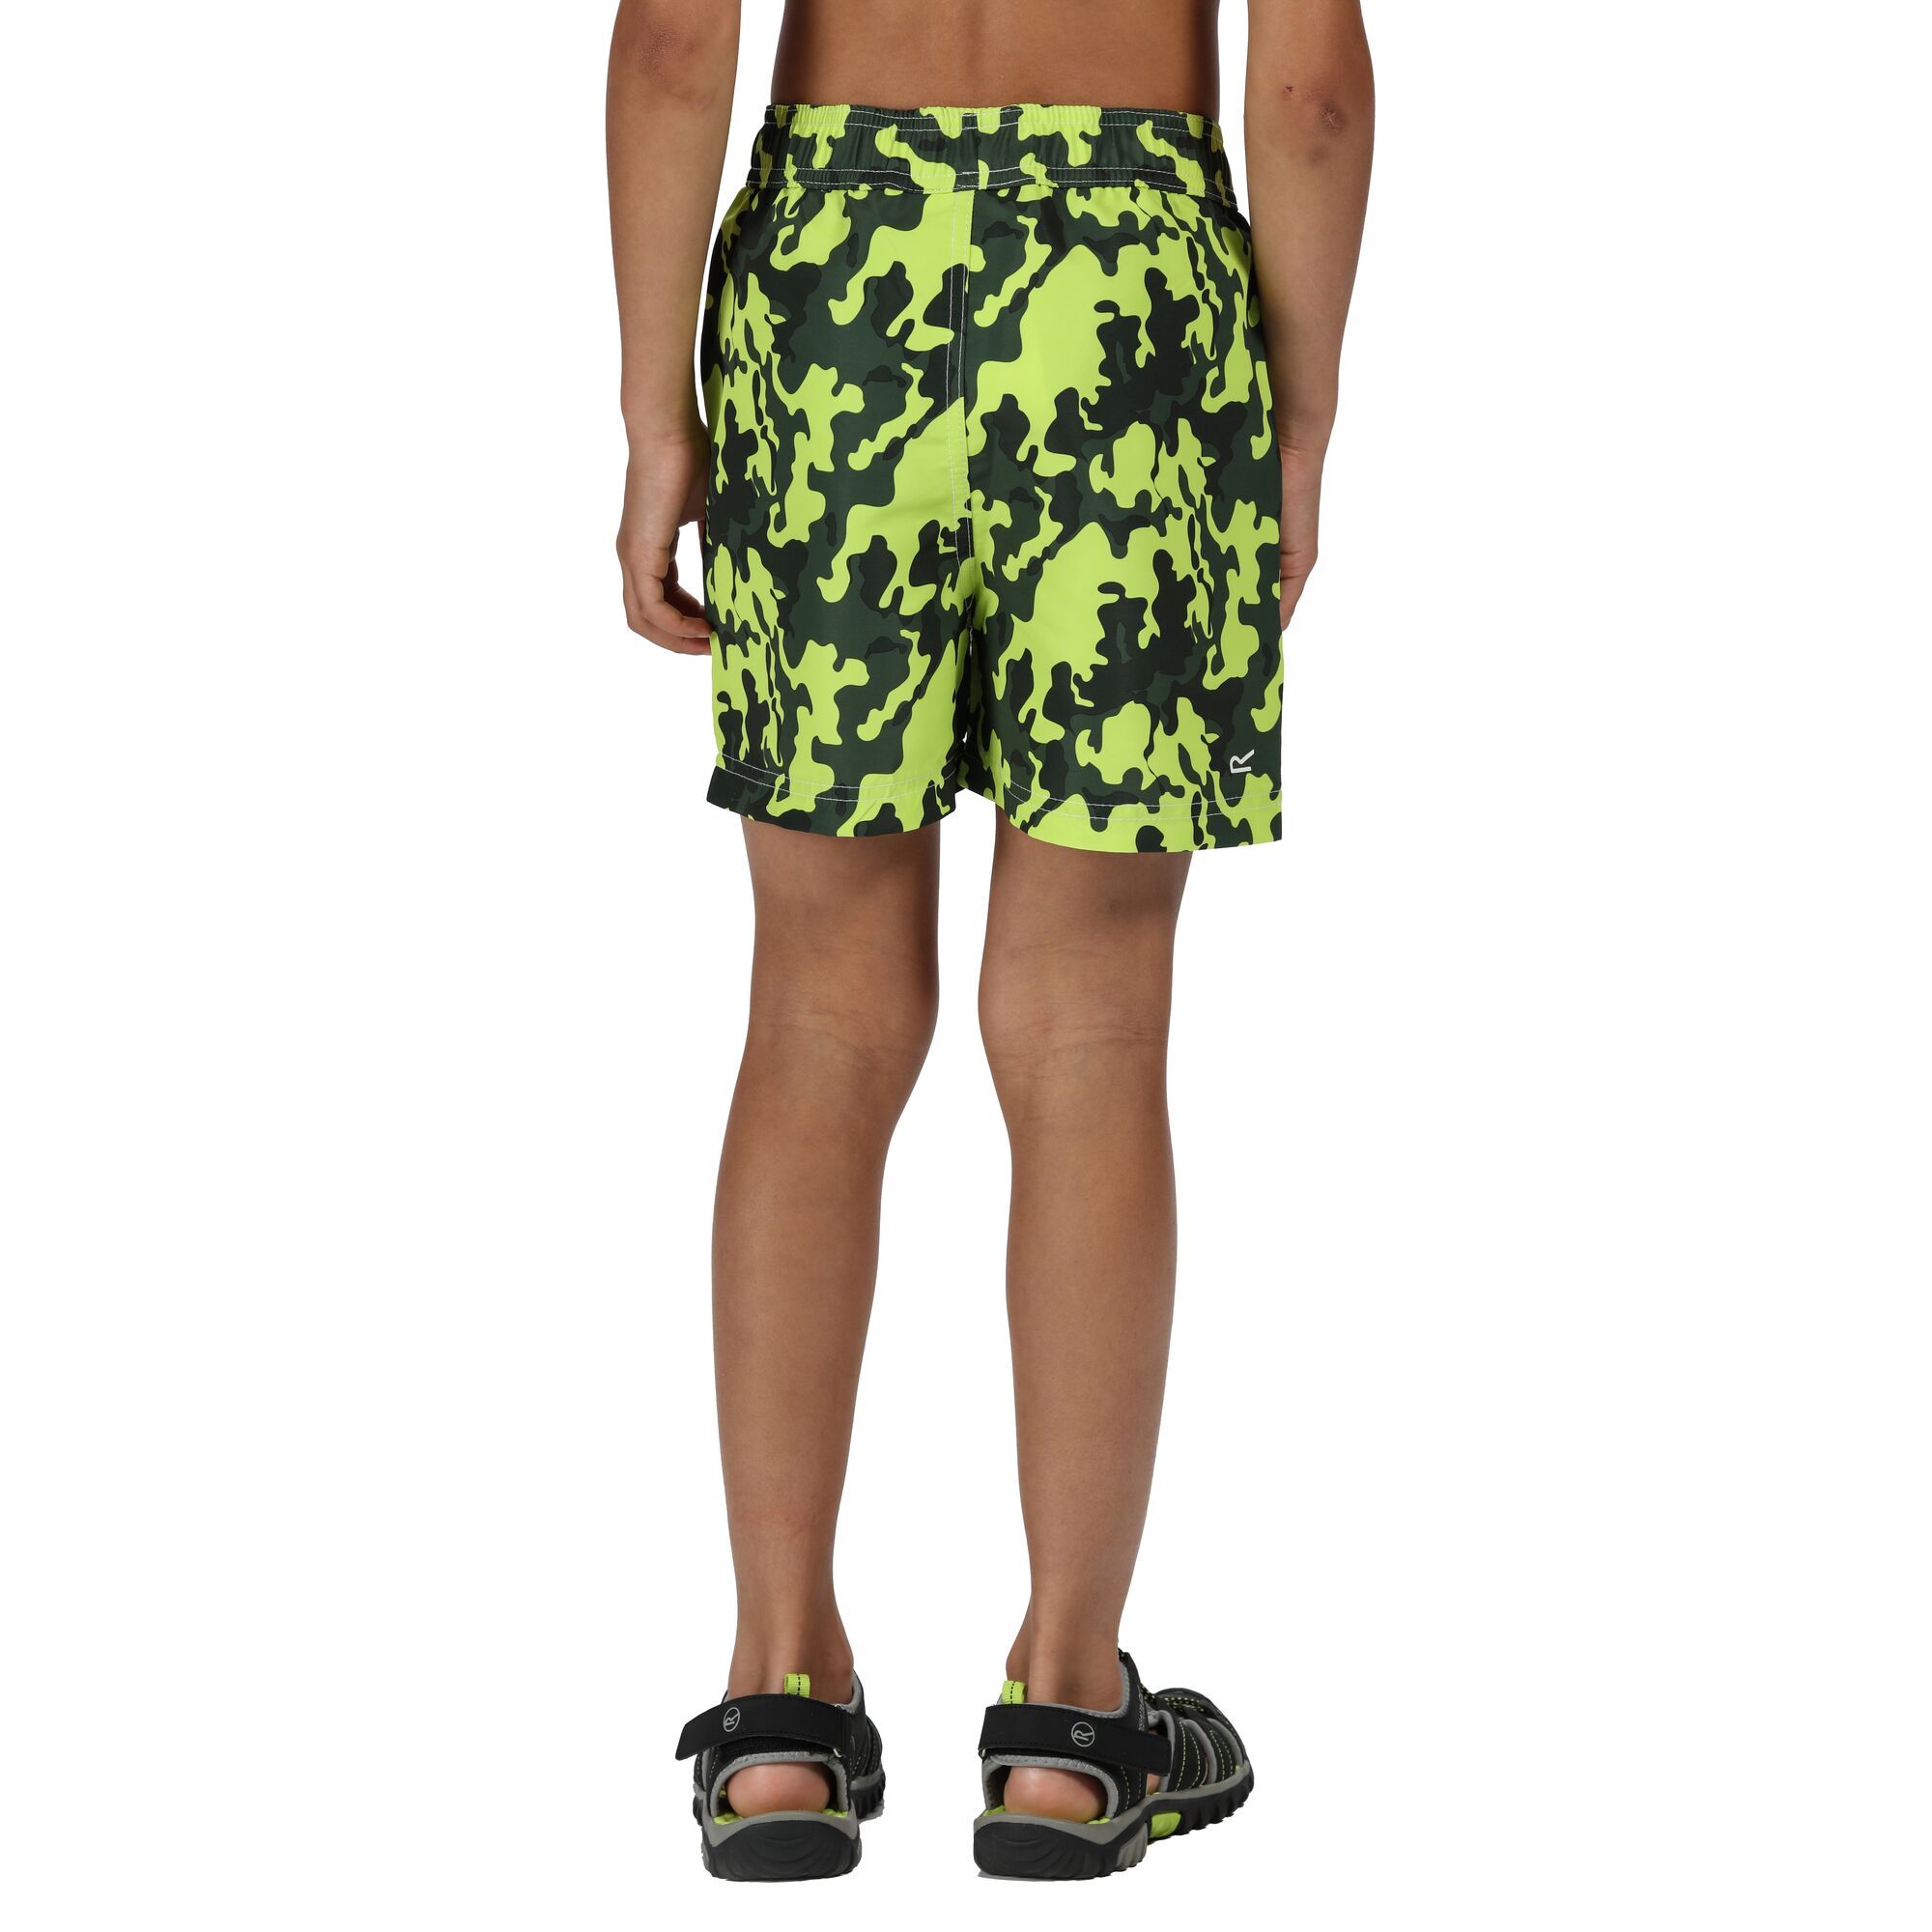 100% polyester Taslan fabric. Quick drying fabric. All over camouflage print. Mesh brief liner. Elasticated waist. 2 side pockets. Size guide (waist): 2 Years 52-53cm, 3-4 Years 53-54cm, 5-6 Years 55-57cm, 7-8 Years 58-60cm, 9-10 Years 61-64cm, 11-12 Years 65-66cm, 13 Years 69cm, 14 Years 73cm, 15-16 Years 73cm. Please note: Drawcord not included.